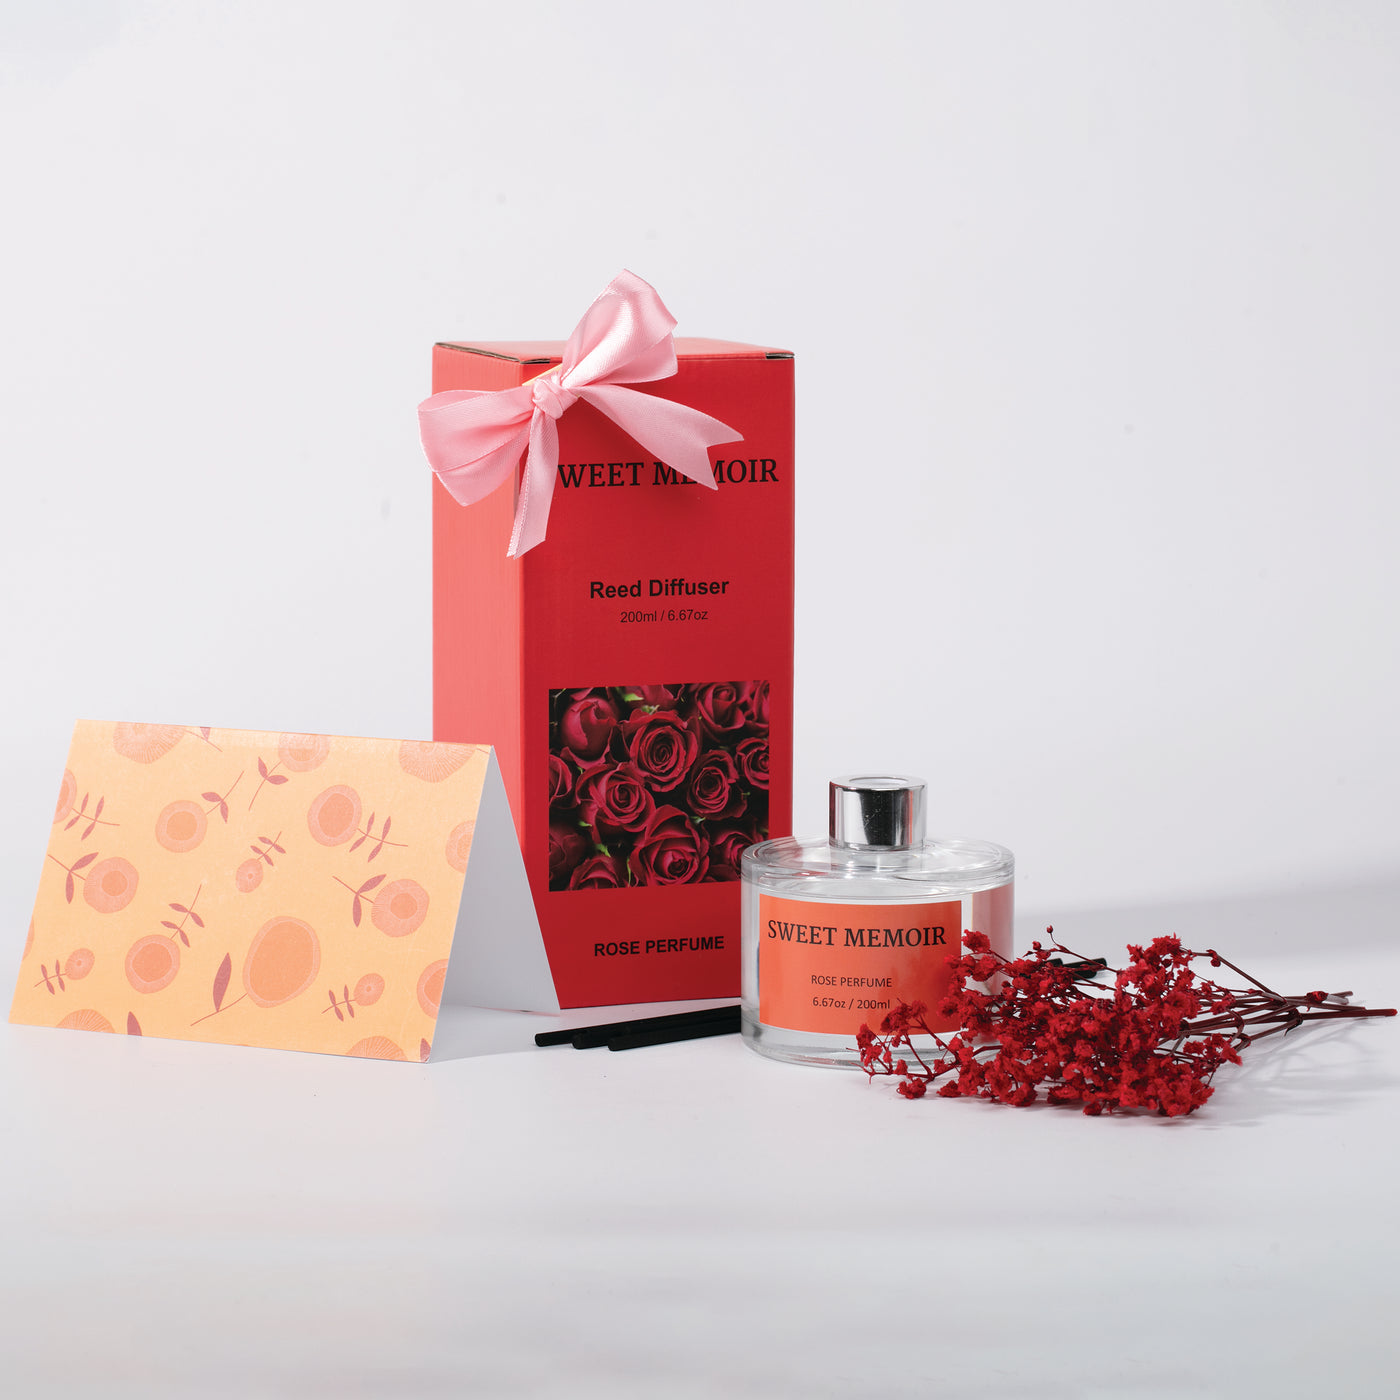 Assortment of Sweet Memoir reed diffuser gift sets, showcasing various scents with attractive packaging, perfect for gifting.